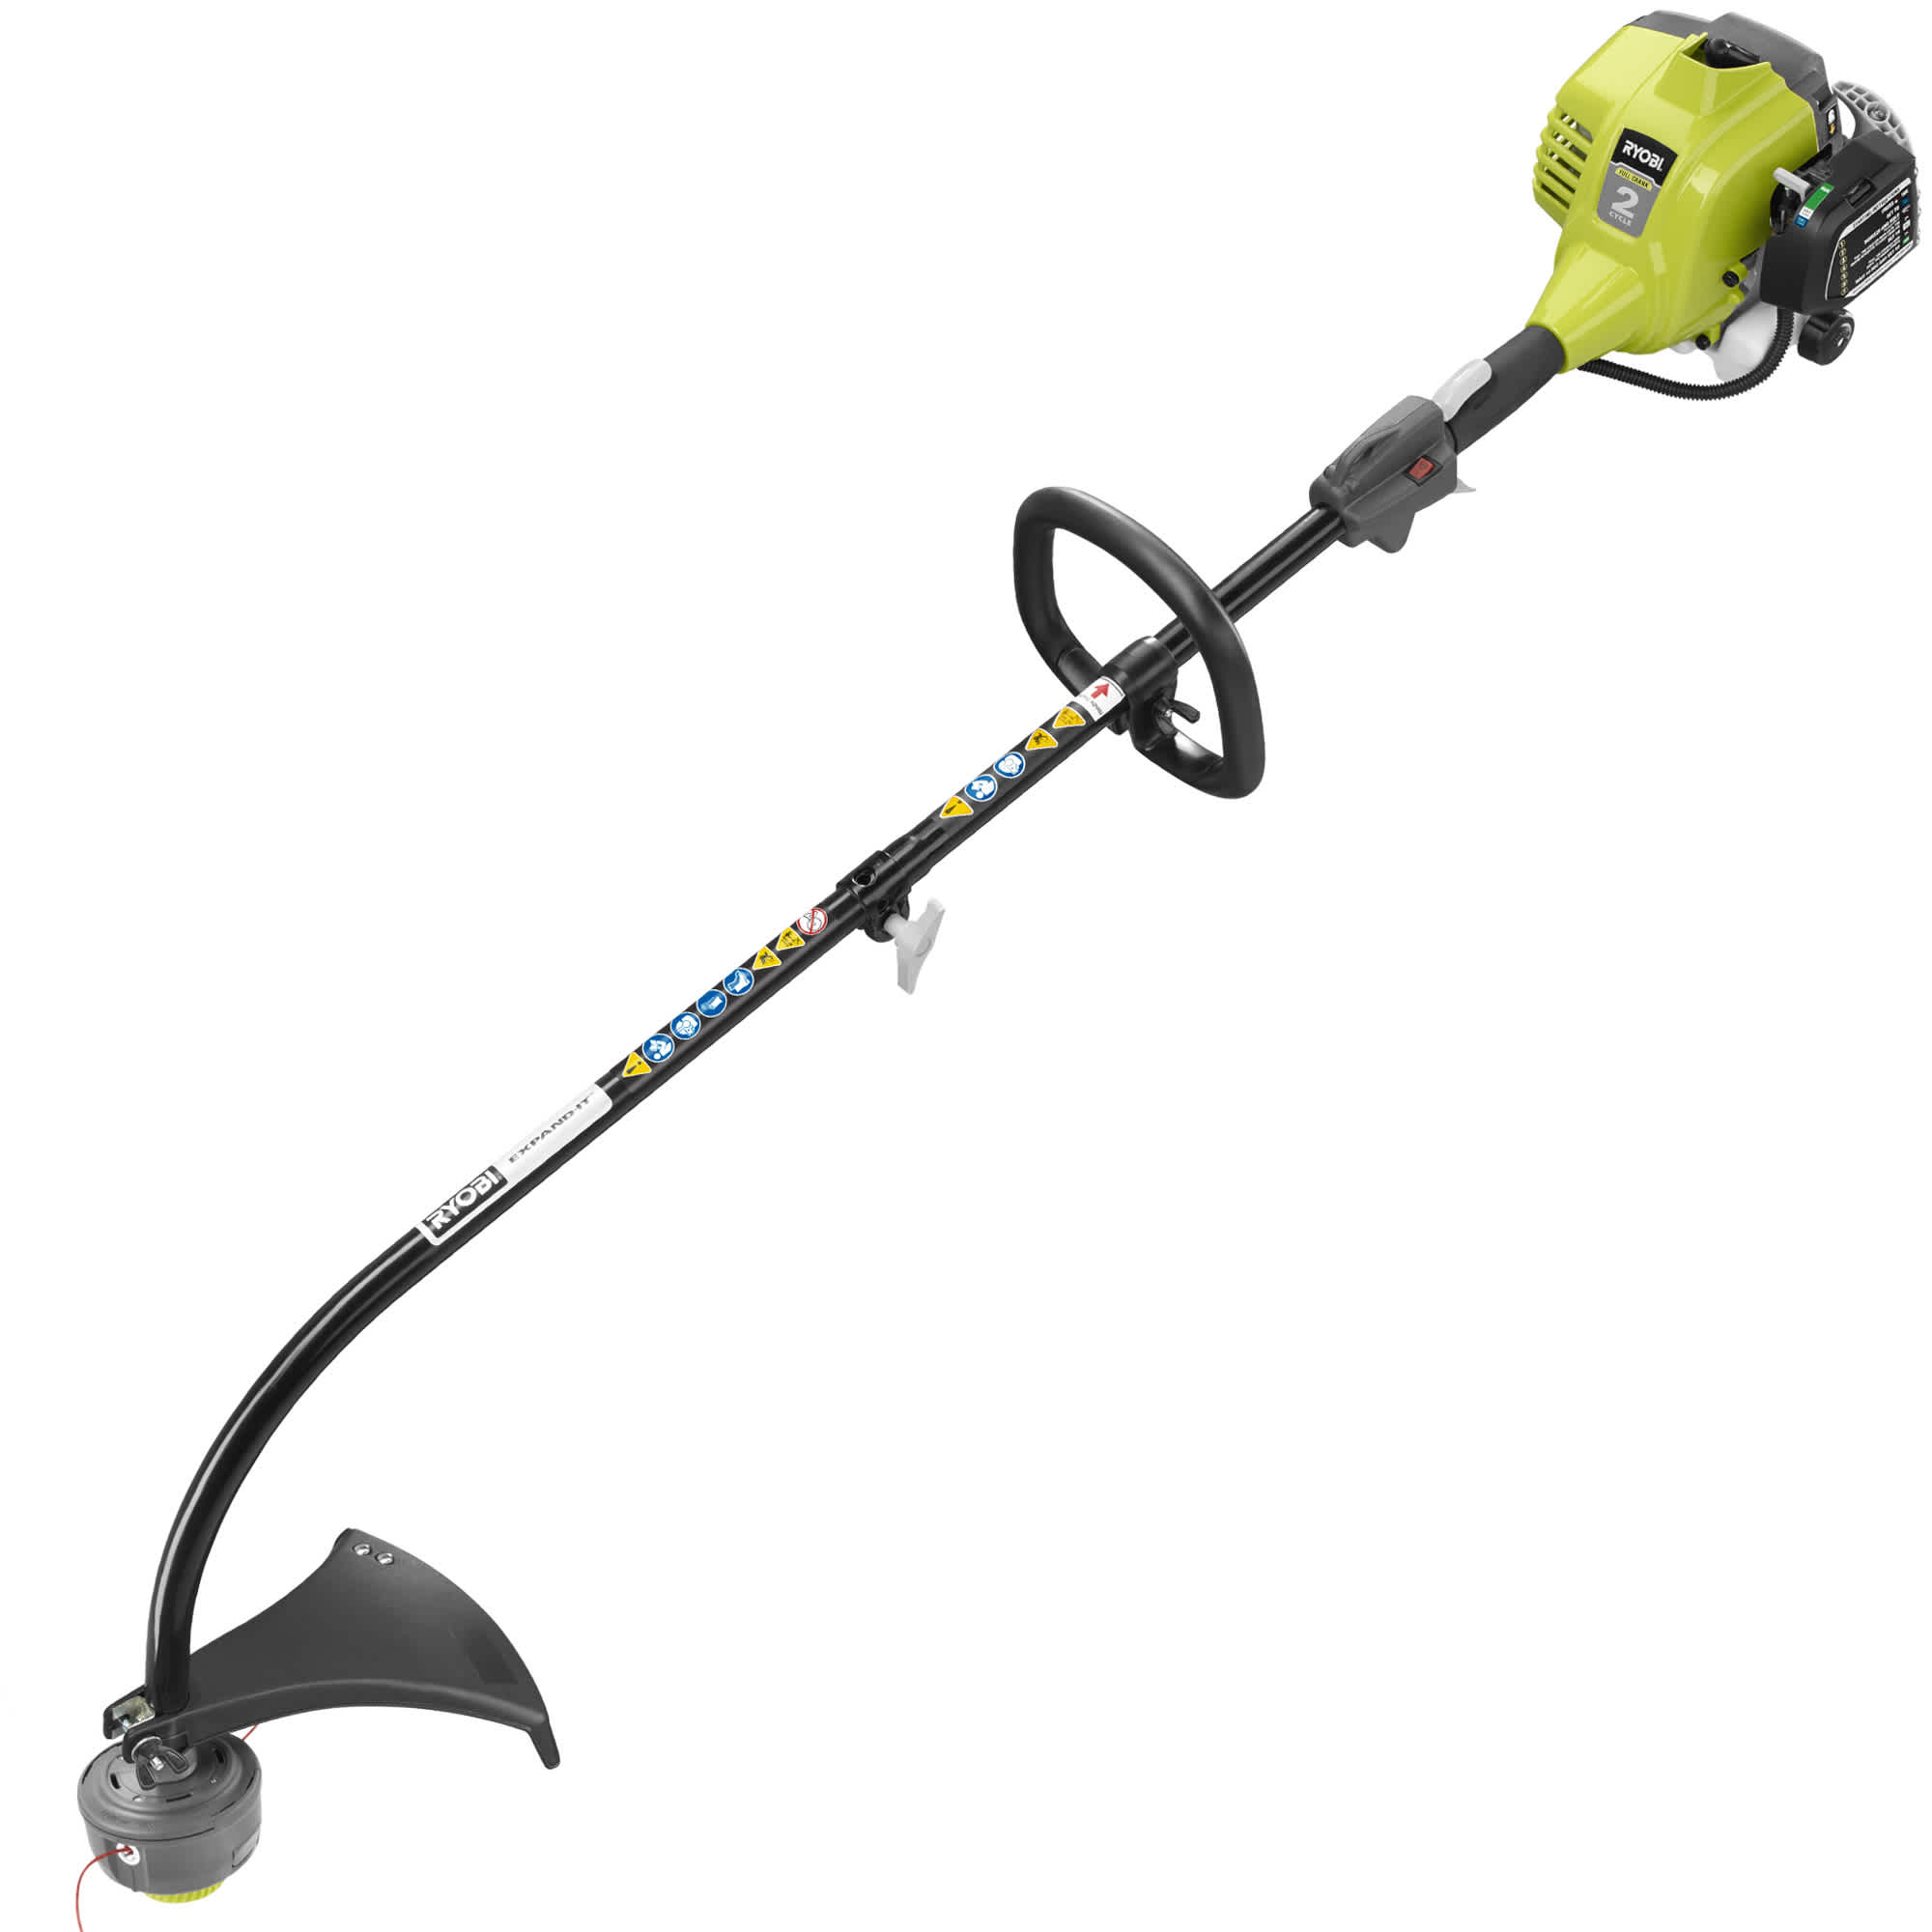 Feature Image for 2 Cycle Full Crank Curved Shaft String Trimmer.